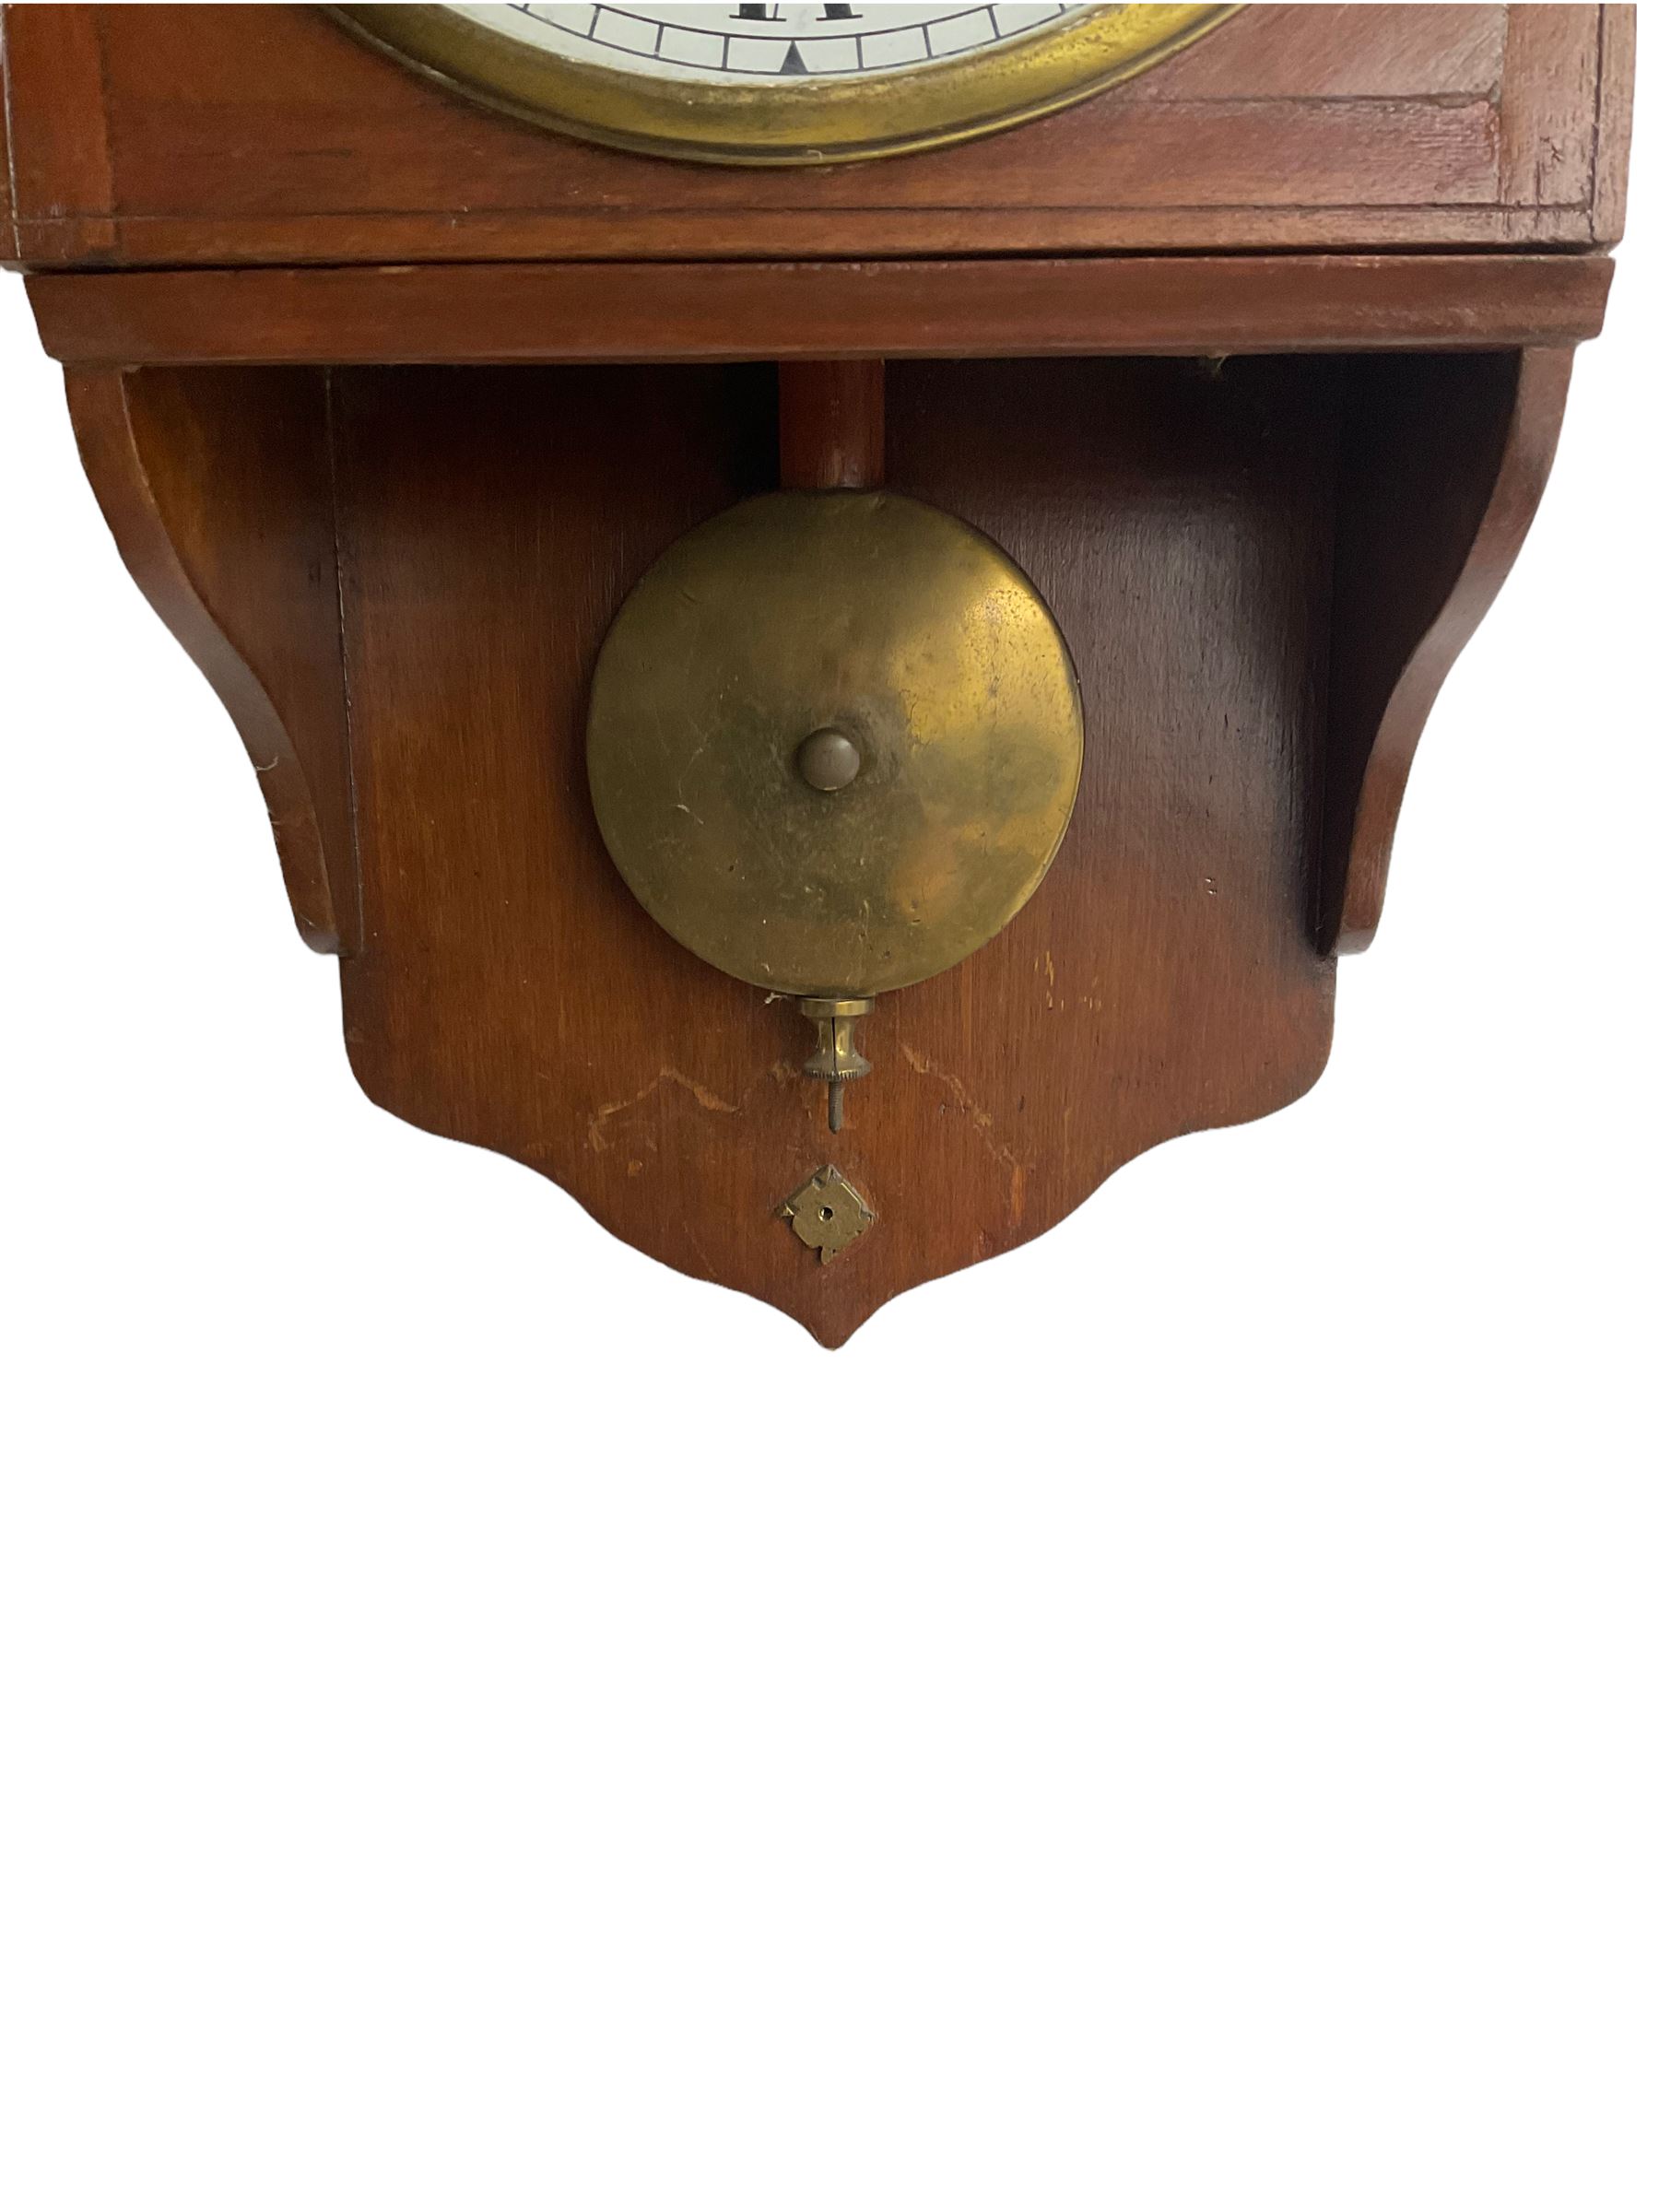 An early 20th century wall clock in a mahogany case - Image 3 of 4